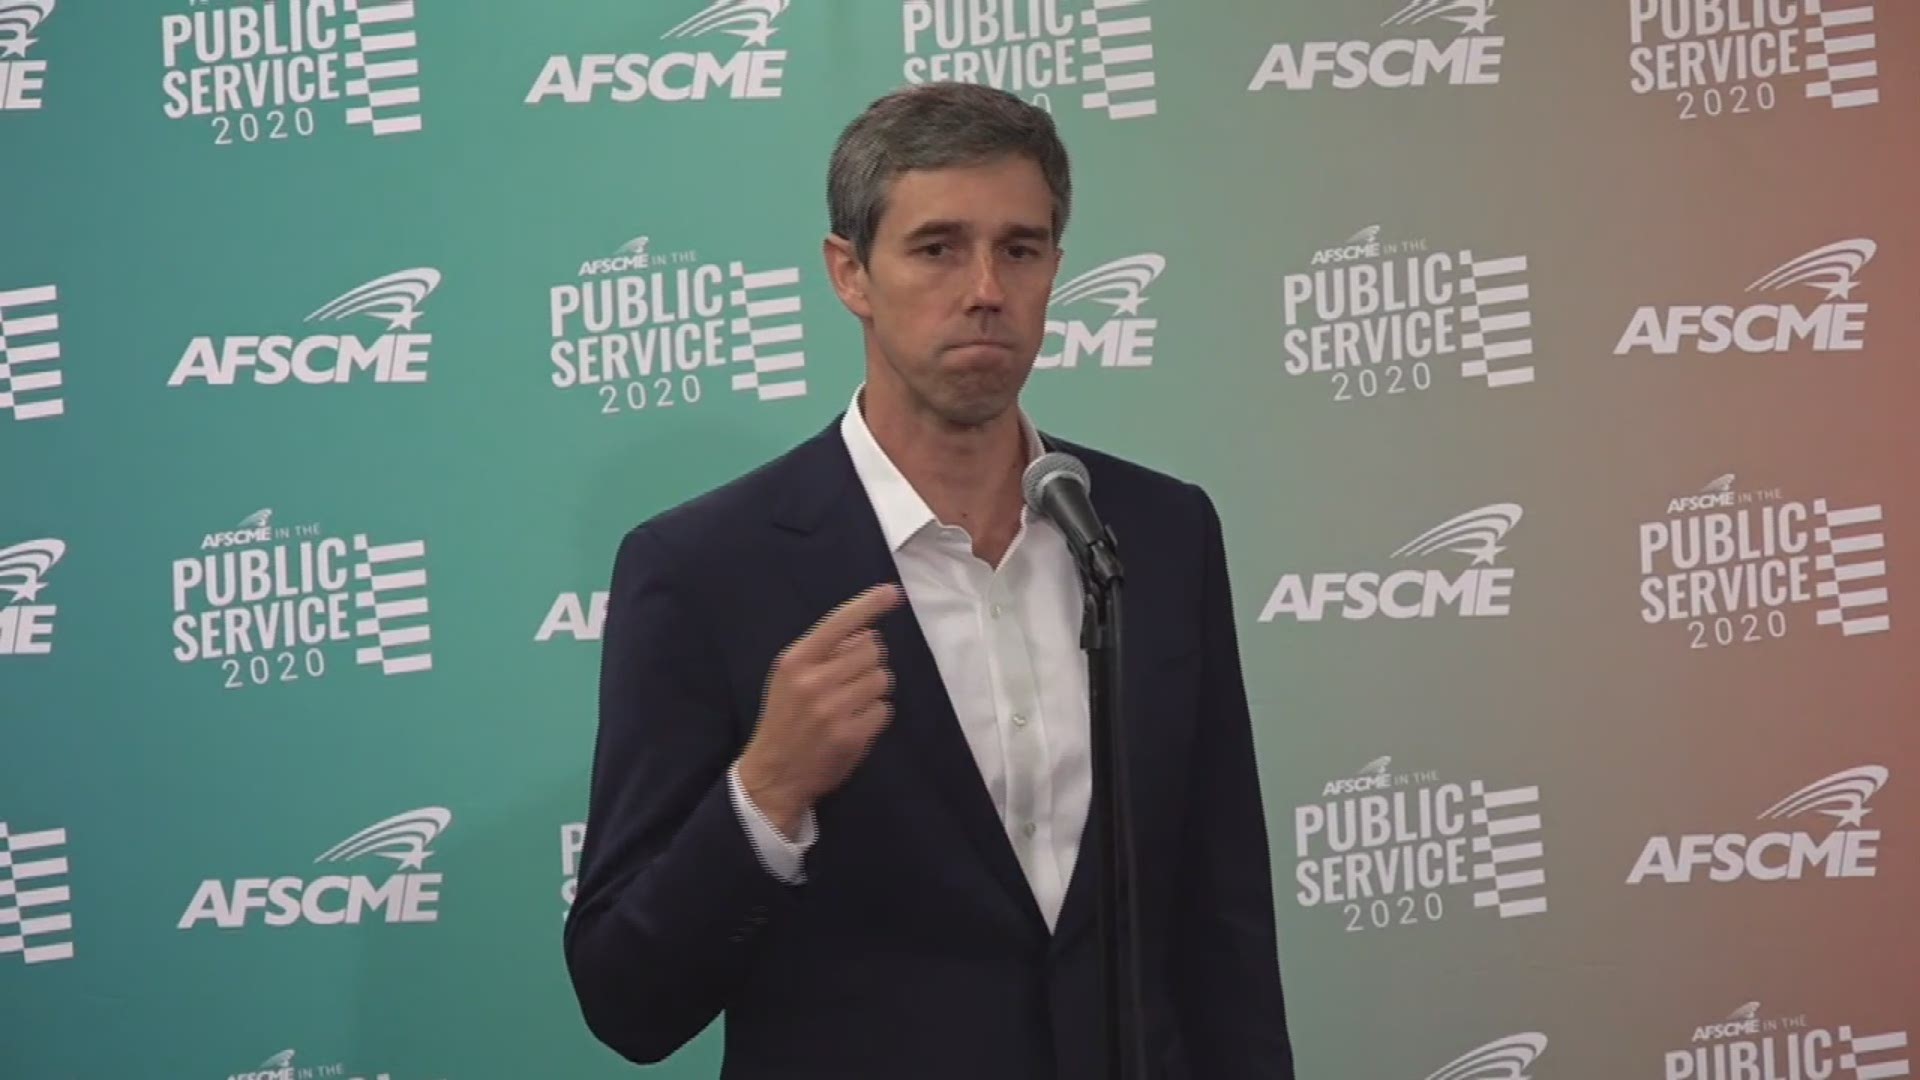 Beto O'Rourke canceled his previously scheduled campaign events in California and Nevada Saturday to return to El Paso after a deadly shooting occurred at an El Paso shopping mall Satuday.